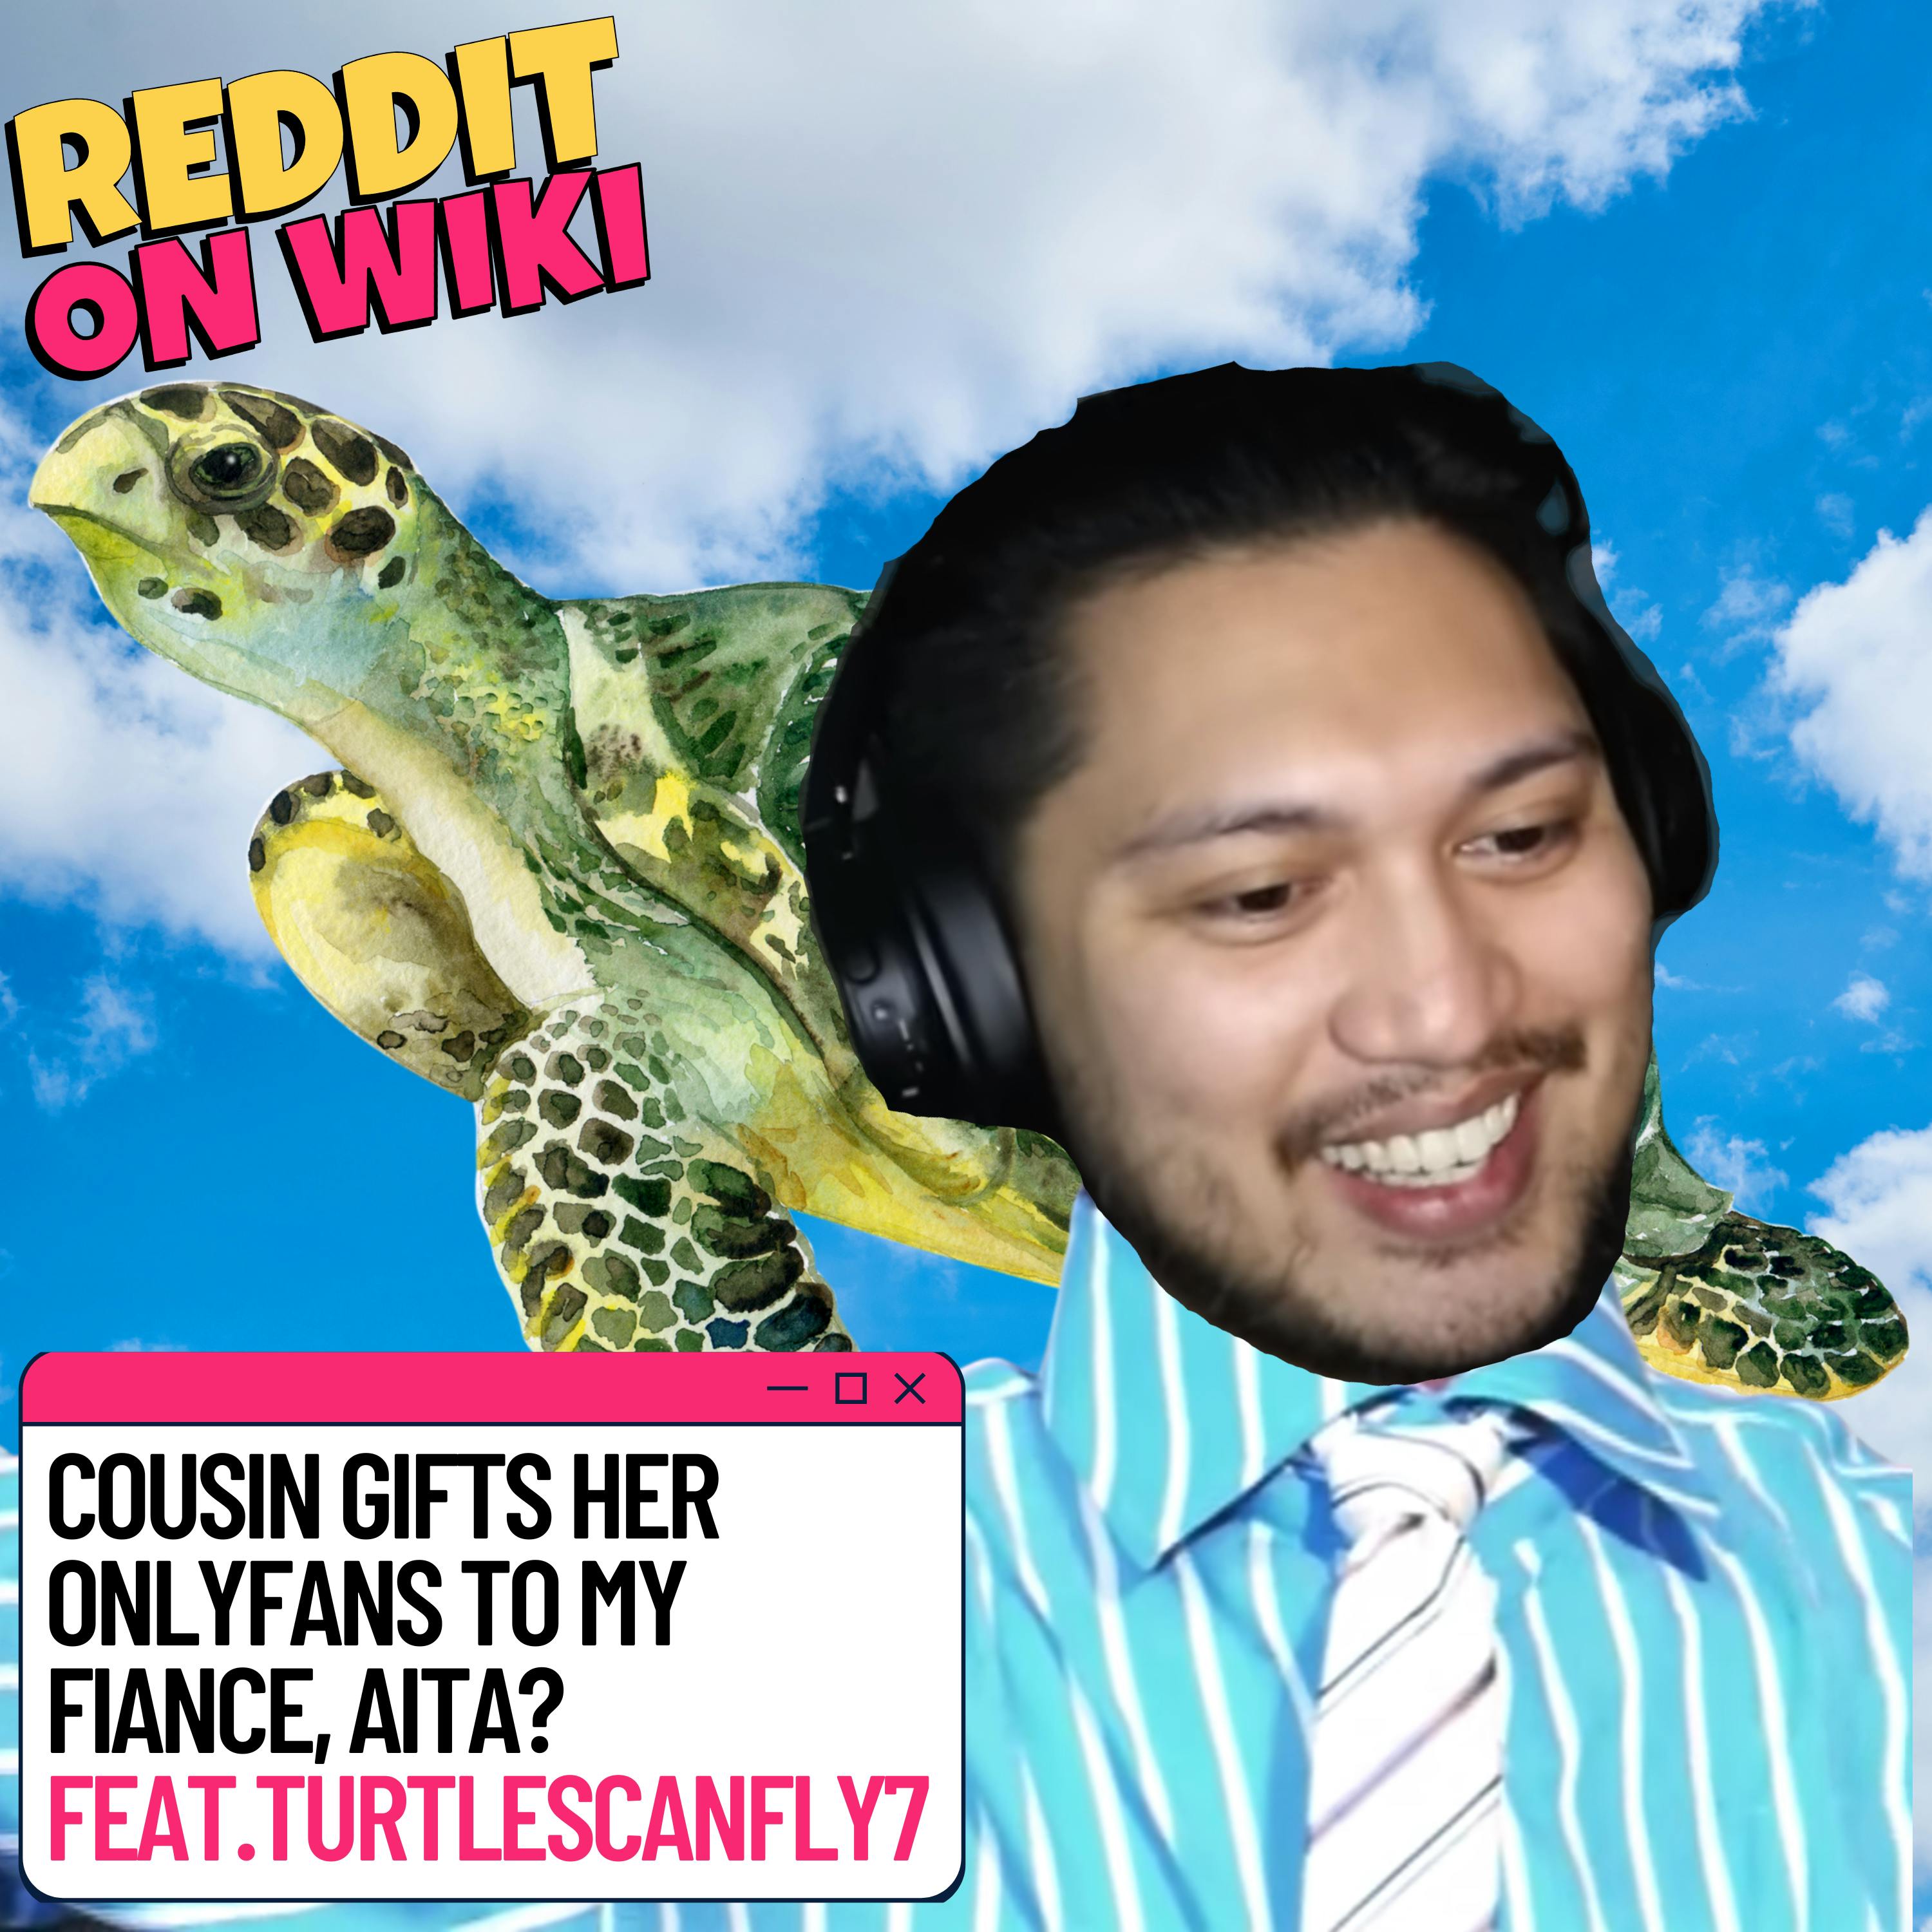 #119: Cousin Gifts Her ONLYFANS To My FIANCÉ!! ft. TurtlesCanFly7 | Am I The Asshole